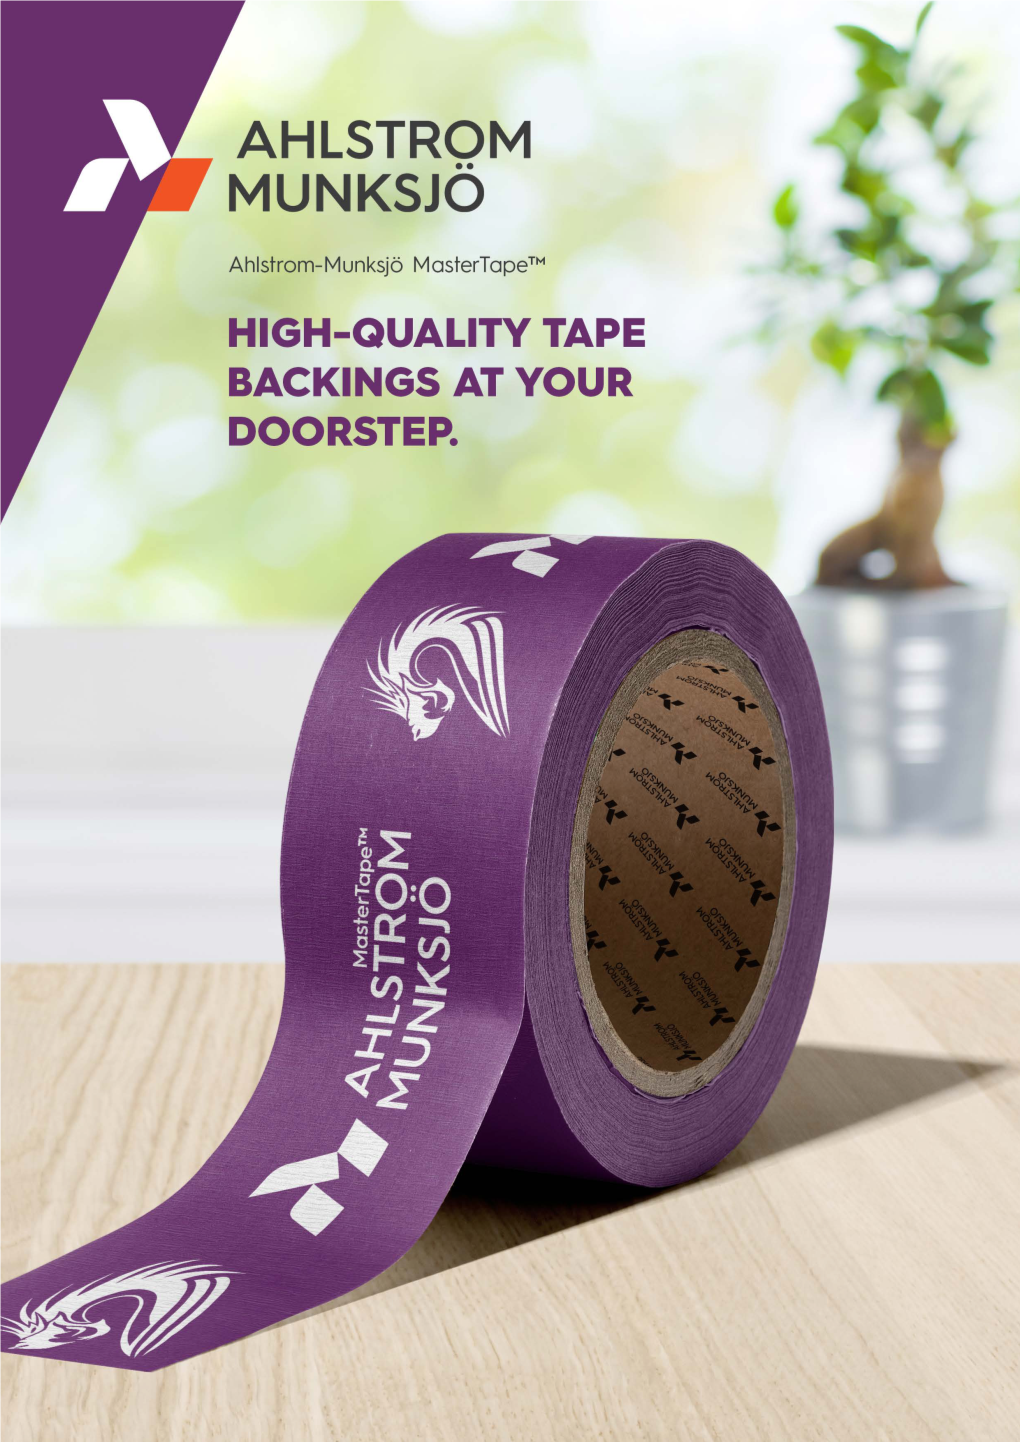 Applications for Packaging Tape